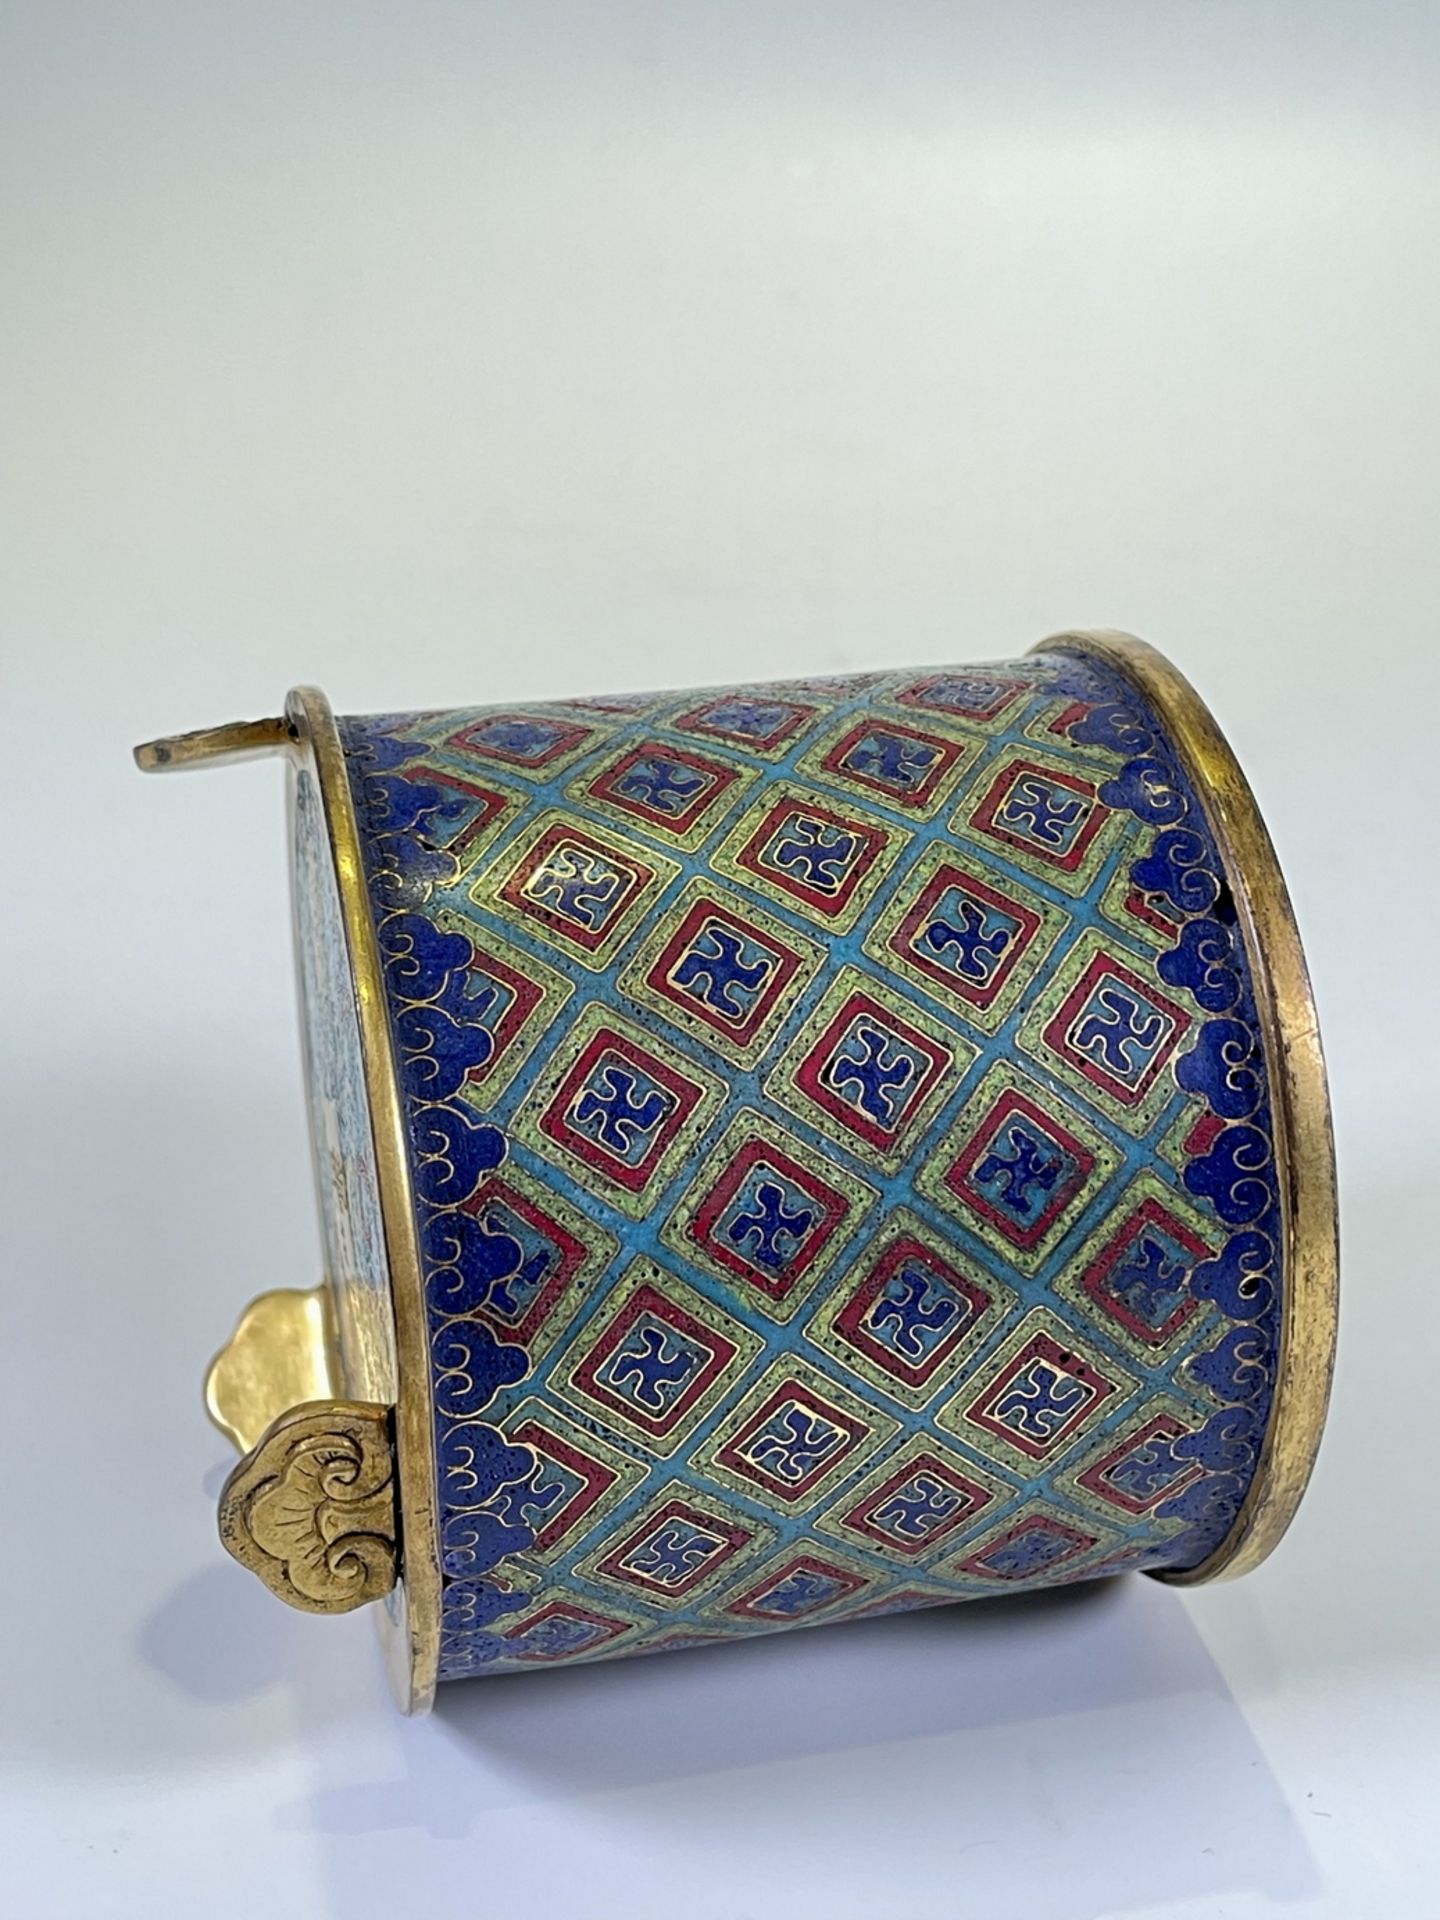 FINE CHINESE CLOISONNE, 18TH/19TH Century Pr. Collection of NARA private gallary.  - Image 7 of 11